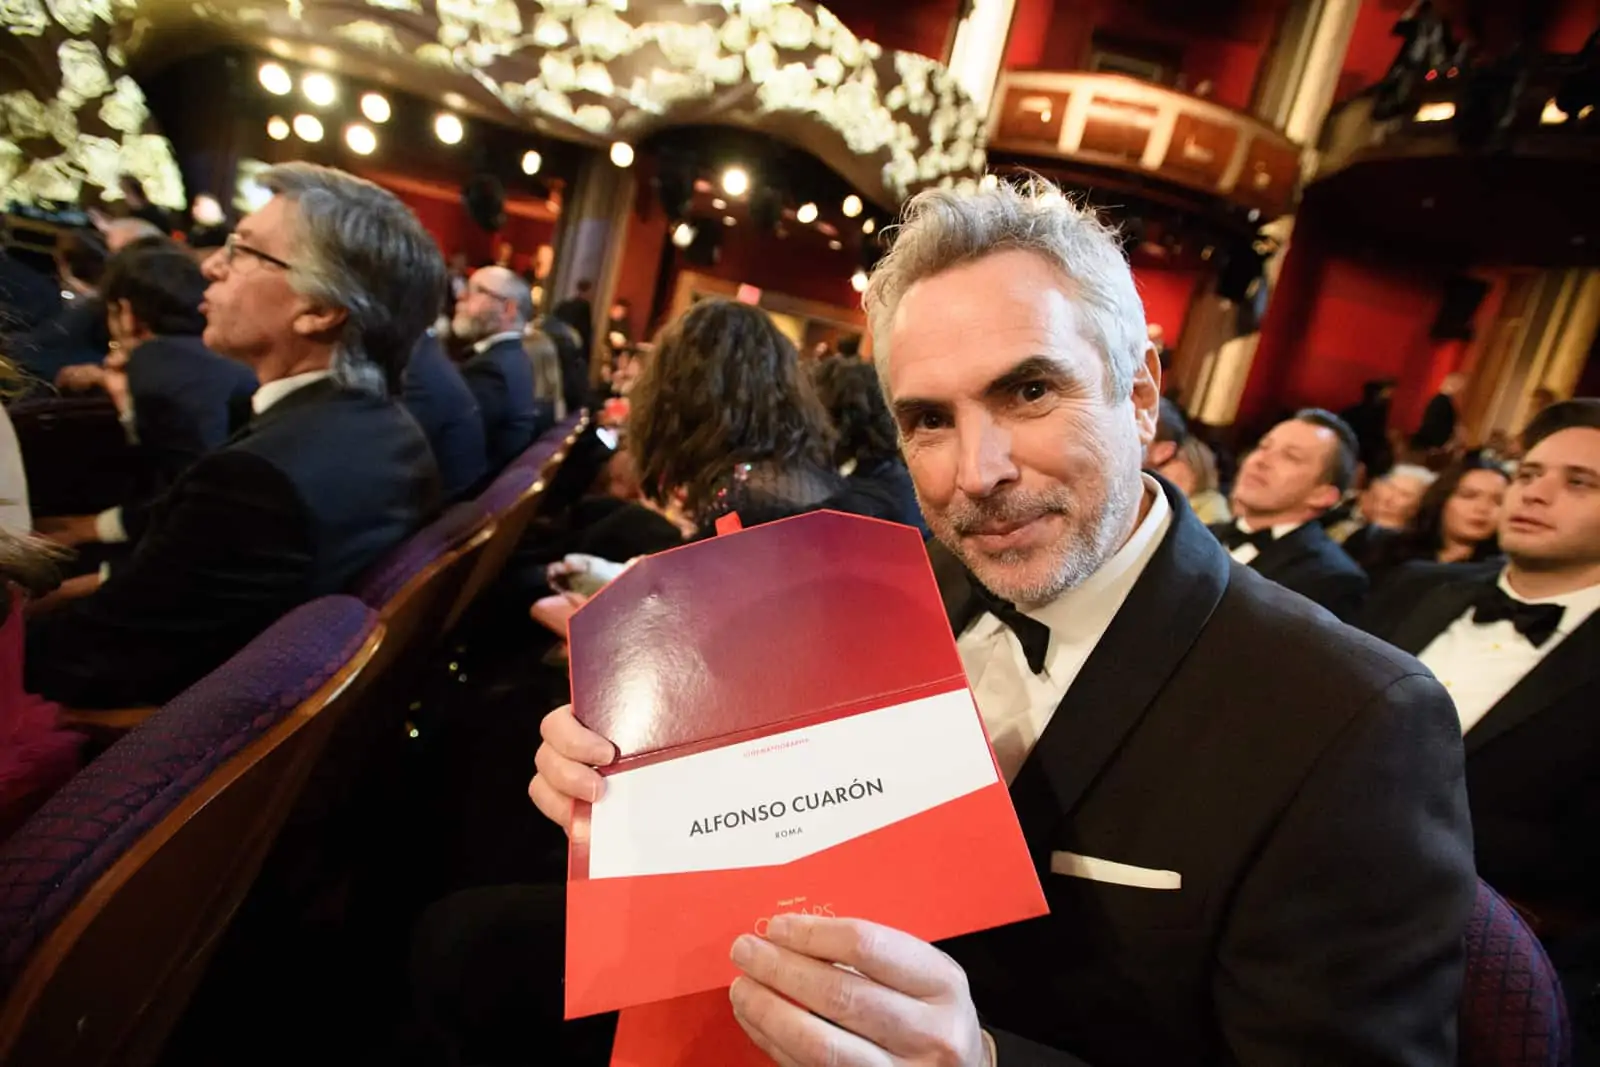 Alfonso Cuarón poses with the winning envelope for achievement in cinematography. Image: Richard Harbaugh / ©A.M.P.A.S.